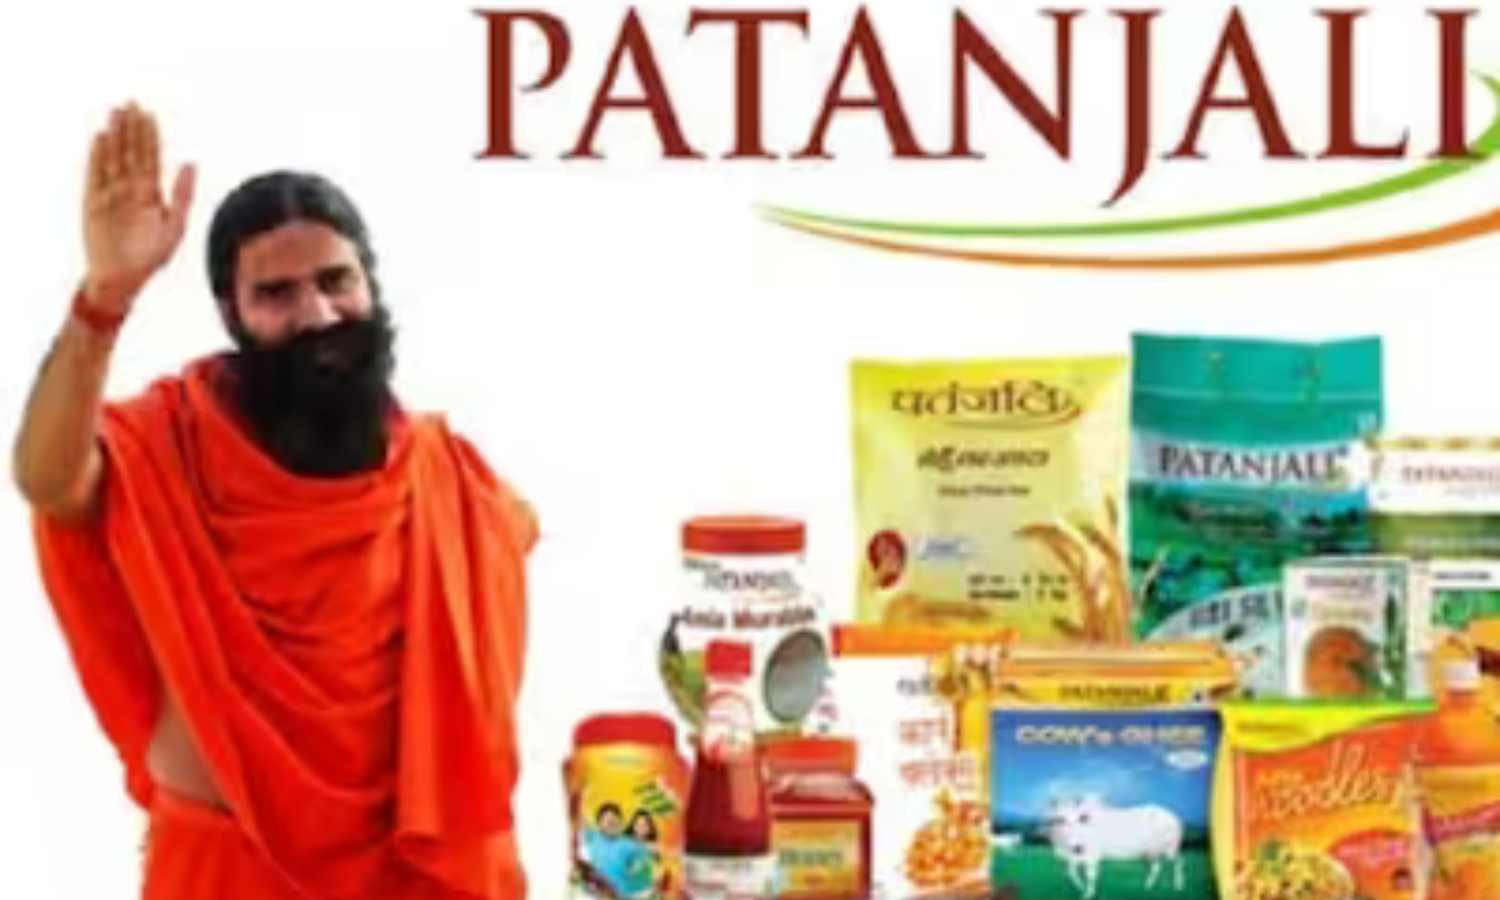 Supreme Court’s Stern Warning to Patanjali: A Case of Misleading Advertising